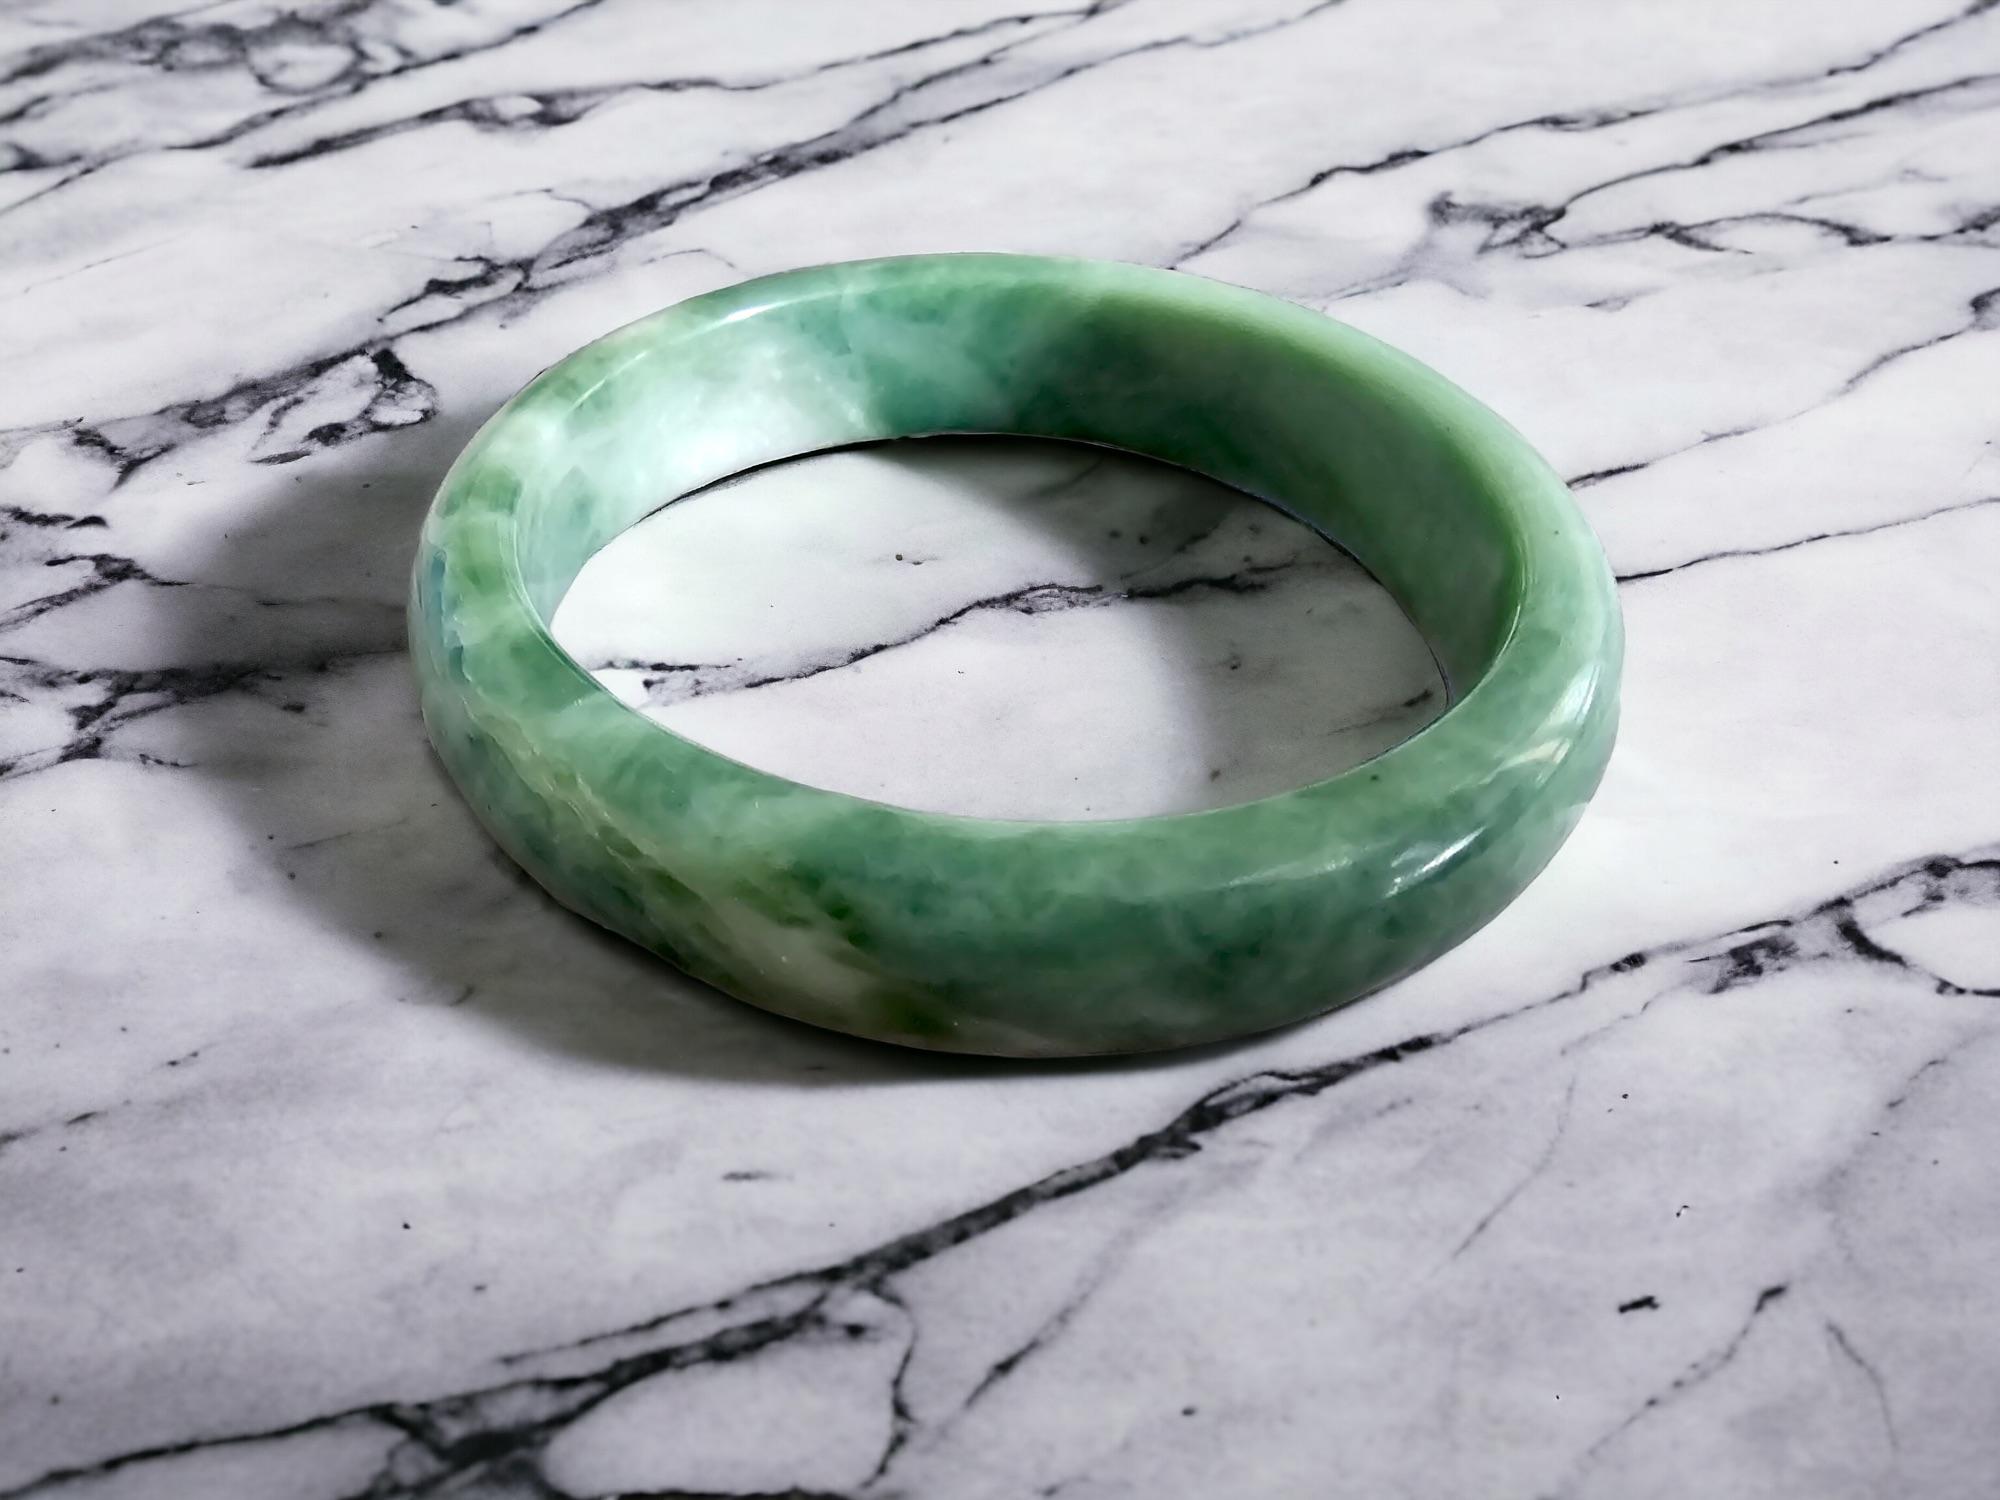 Burmese A-Jadeite Jade Bangle Bracelet; Green, Grey, White Jadeite 08808

Our 'Earth's' Bangle Bracelets are all one-of-one pieces;

This piece is famed for its unique green, grey and white hues with fantastic translucency and optics. The marbling